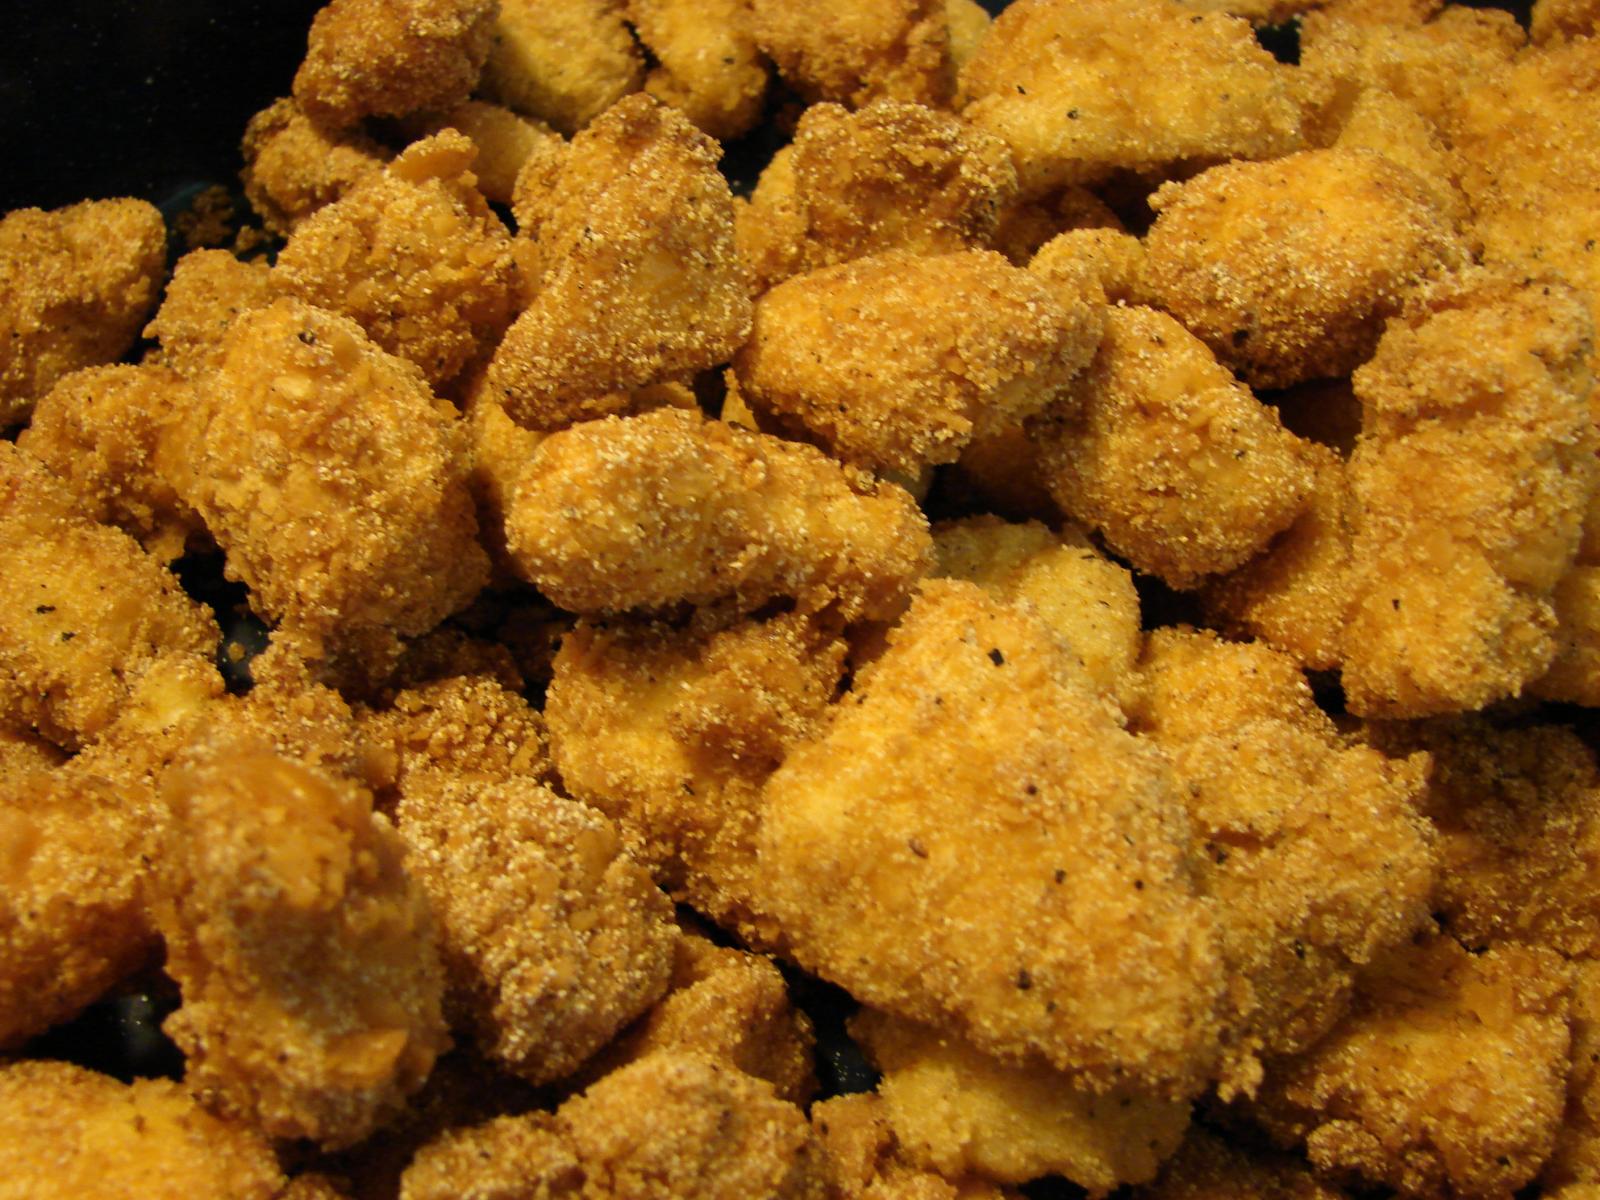 a bunch of fried food being cooked in an oven